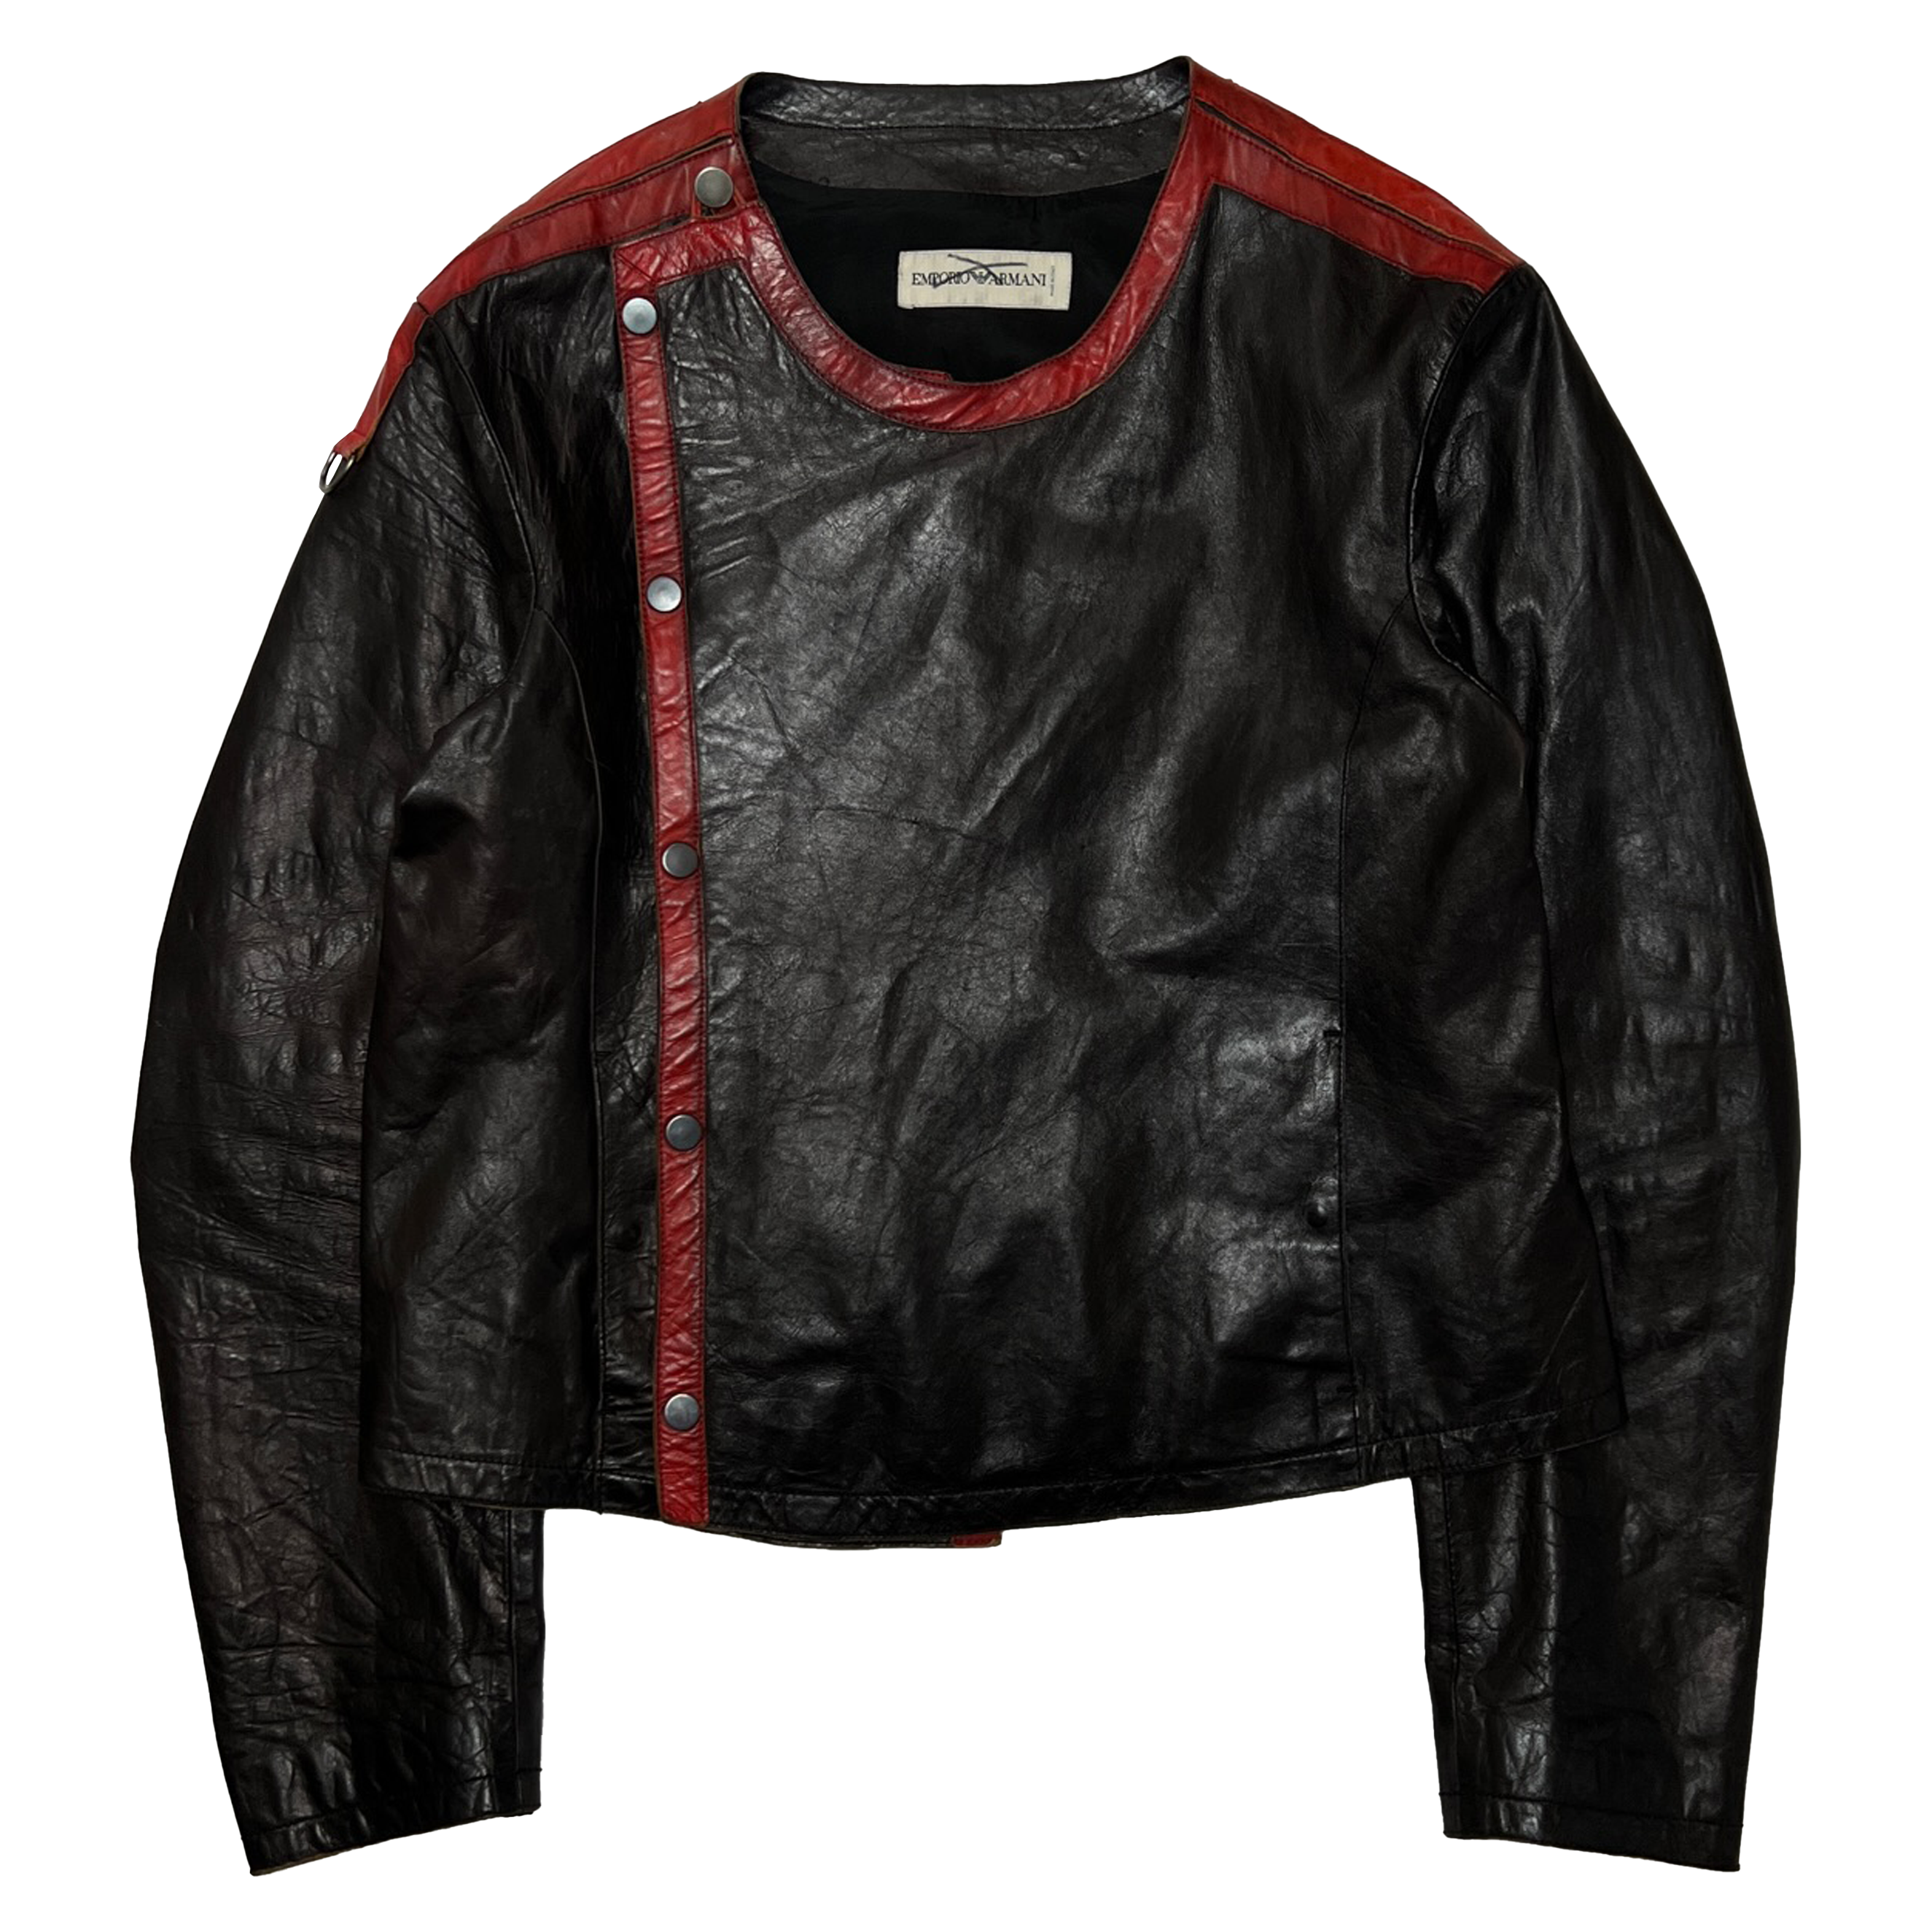 Emporio Armani, 2000s Cropped Moto Leather Jacket with Loop Flap